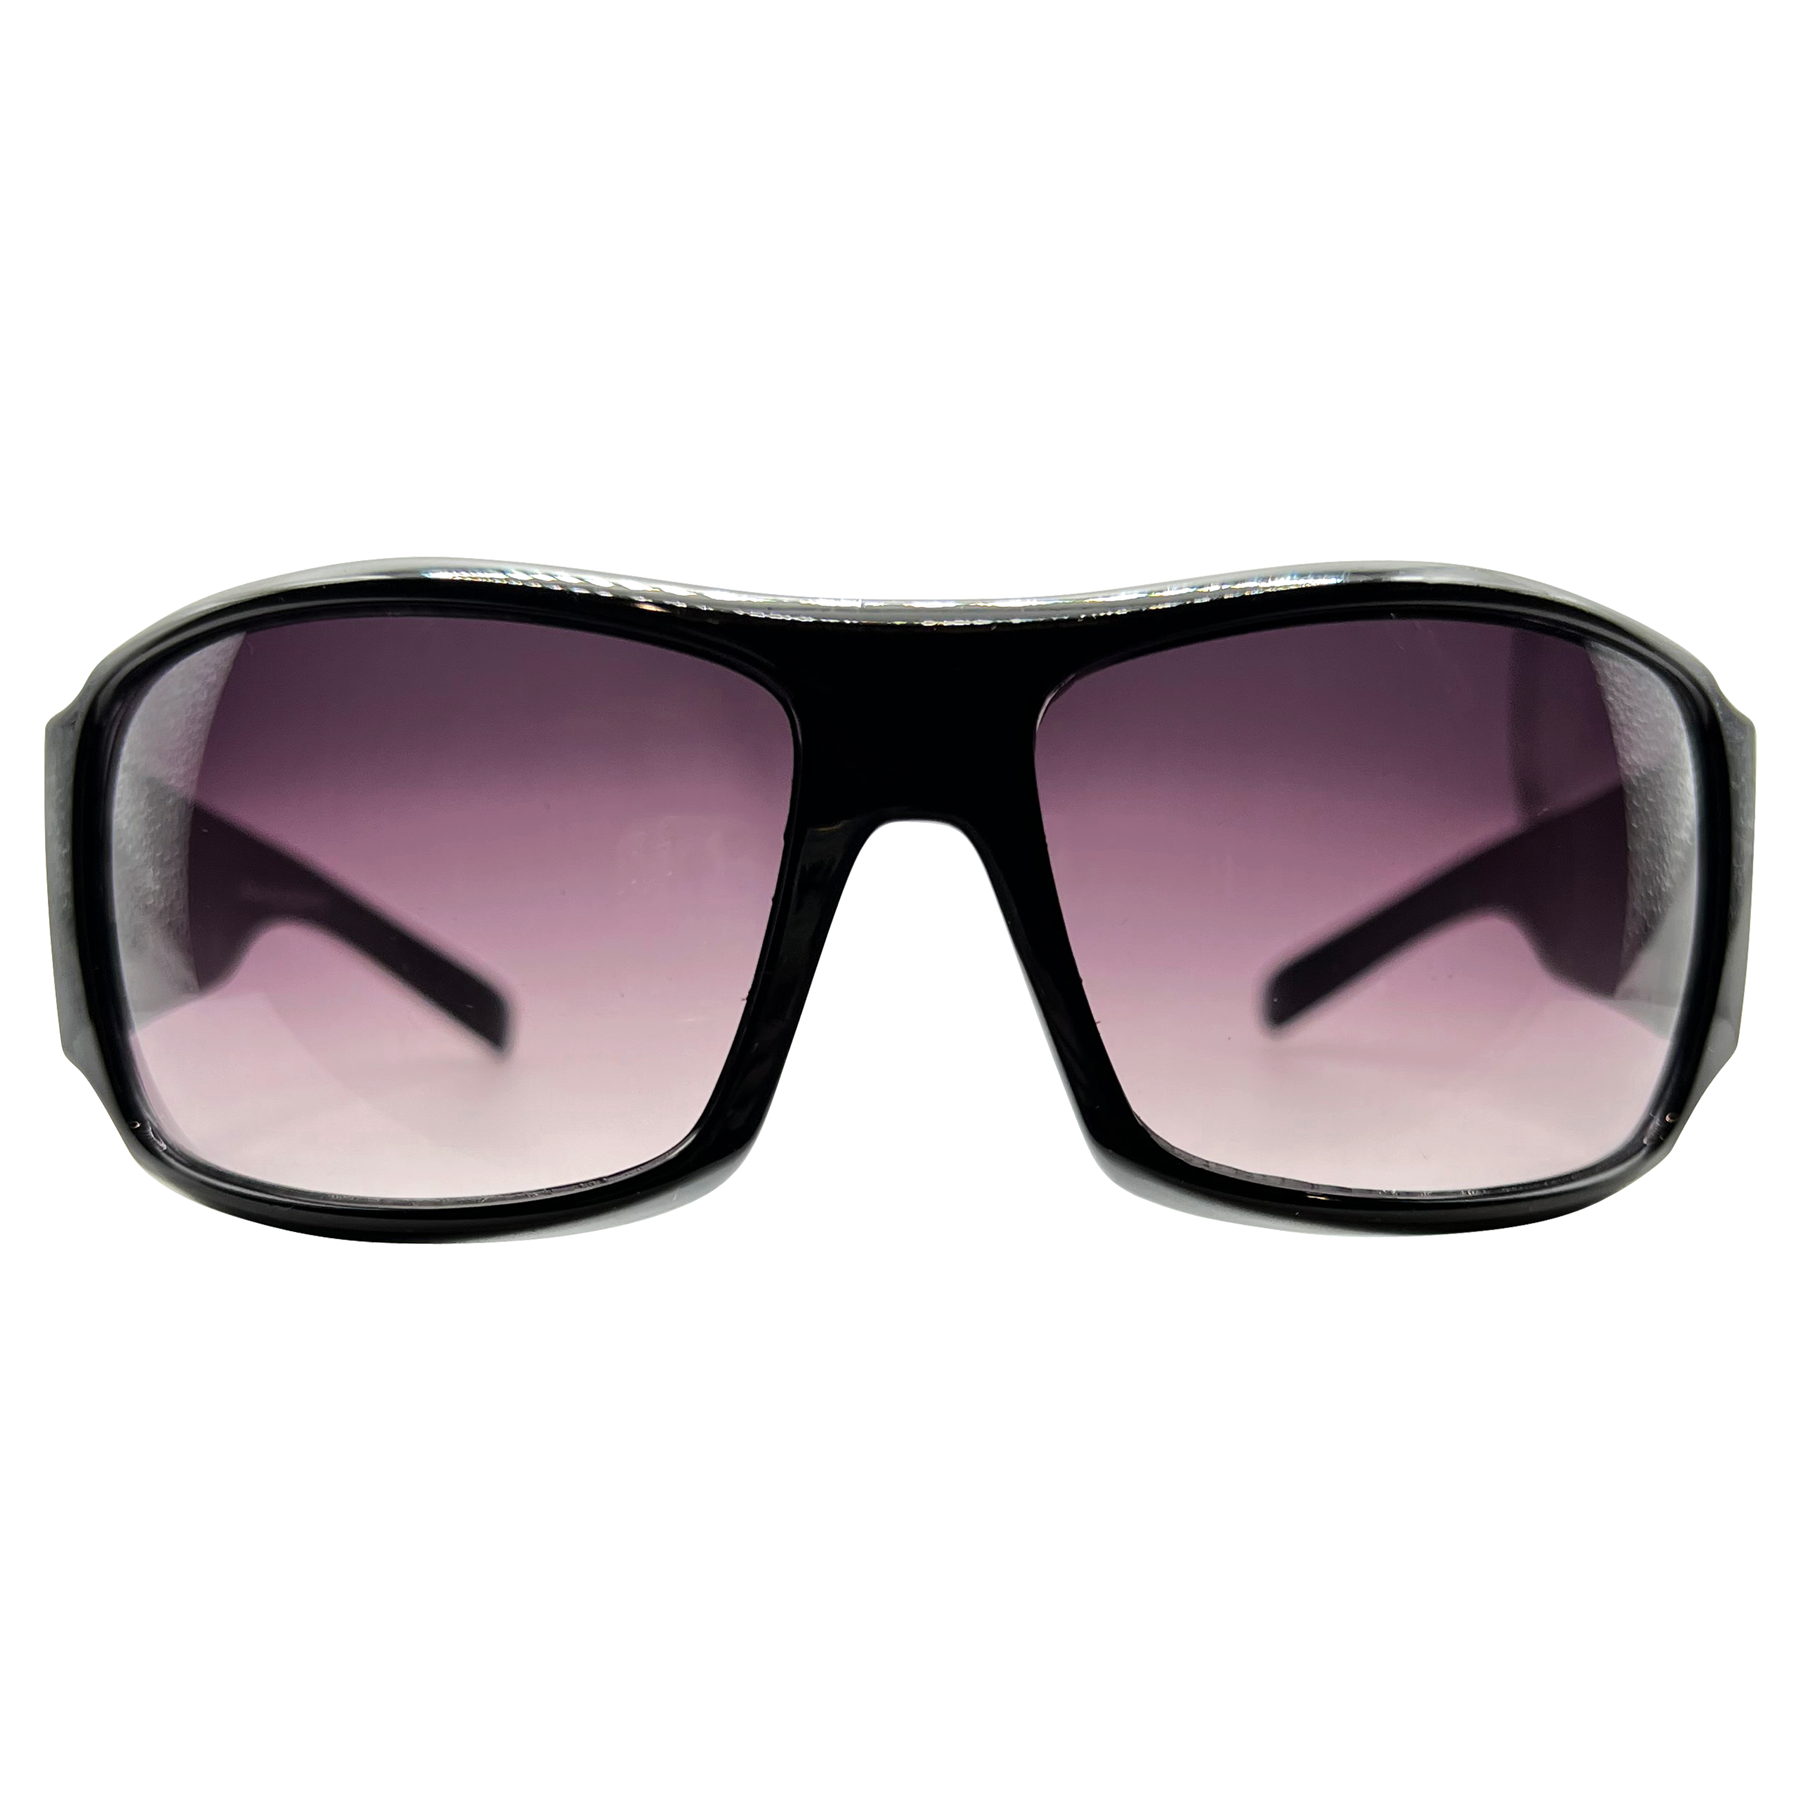 TATTED BEDAZZLED Sporty Y2K Tattoo Art Sunglasses: Black/Smoke Flame Skull